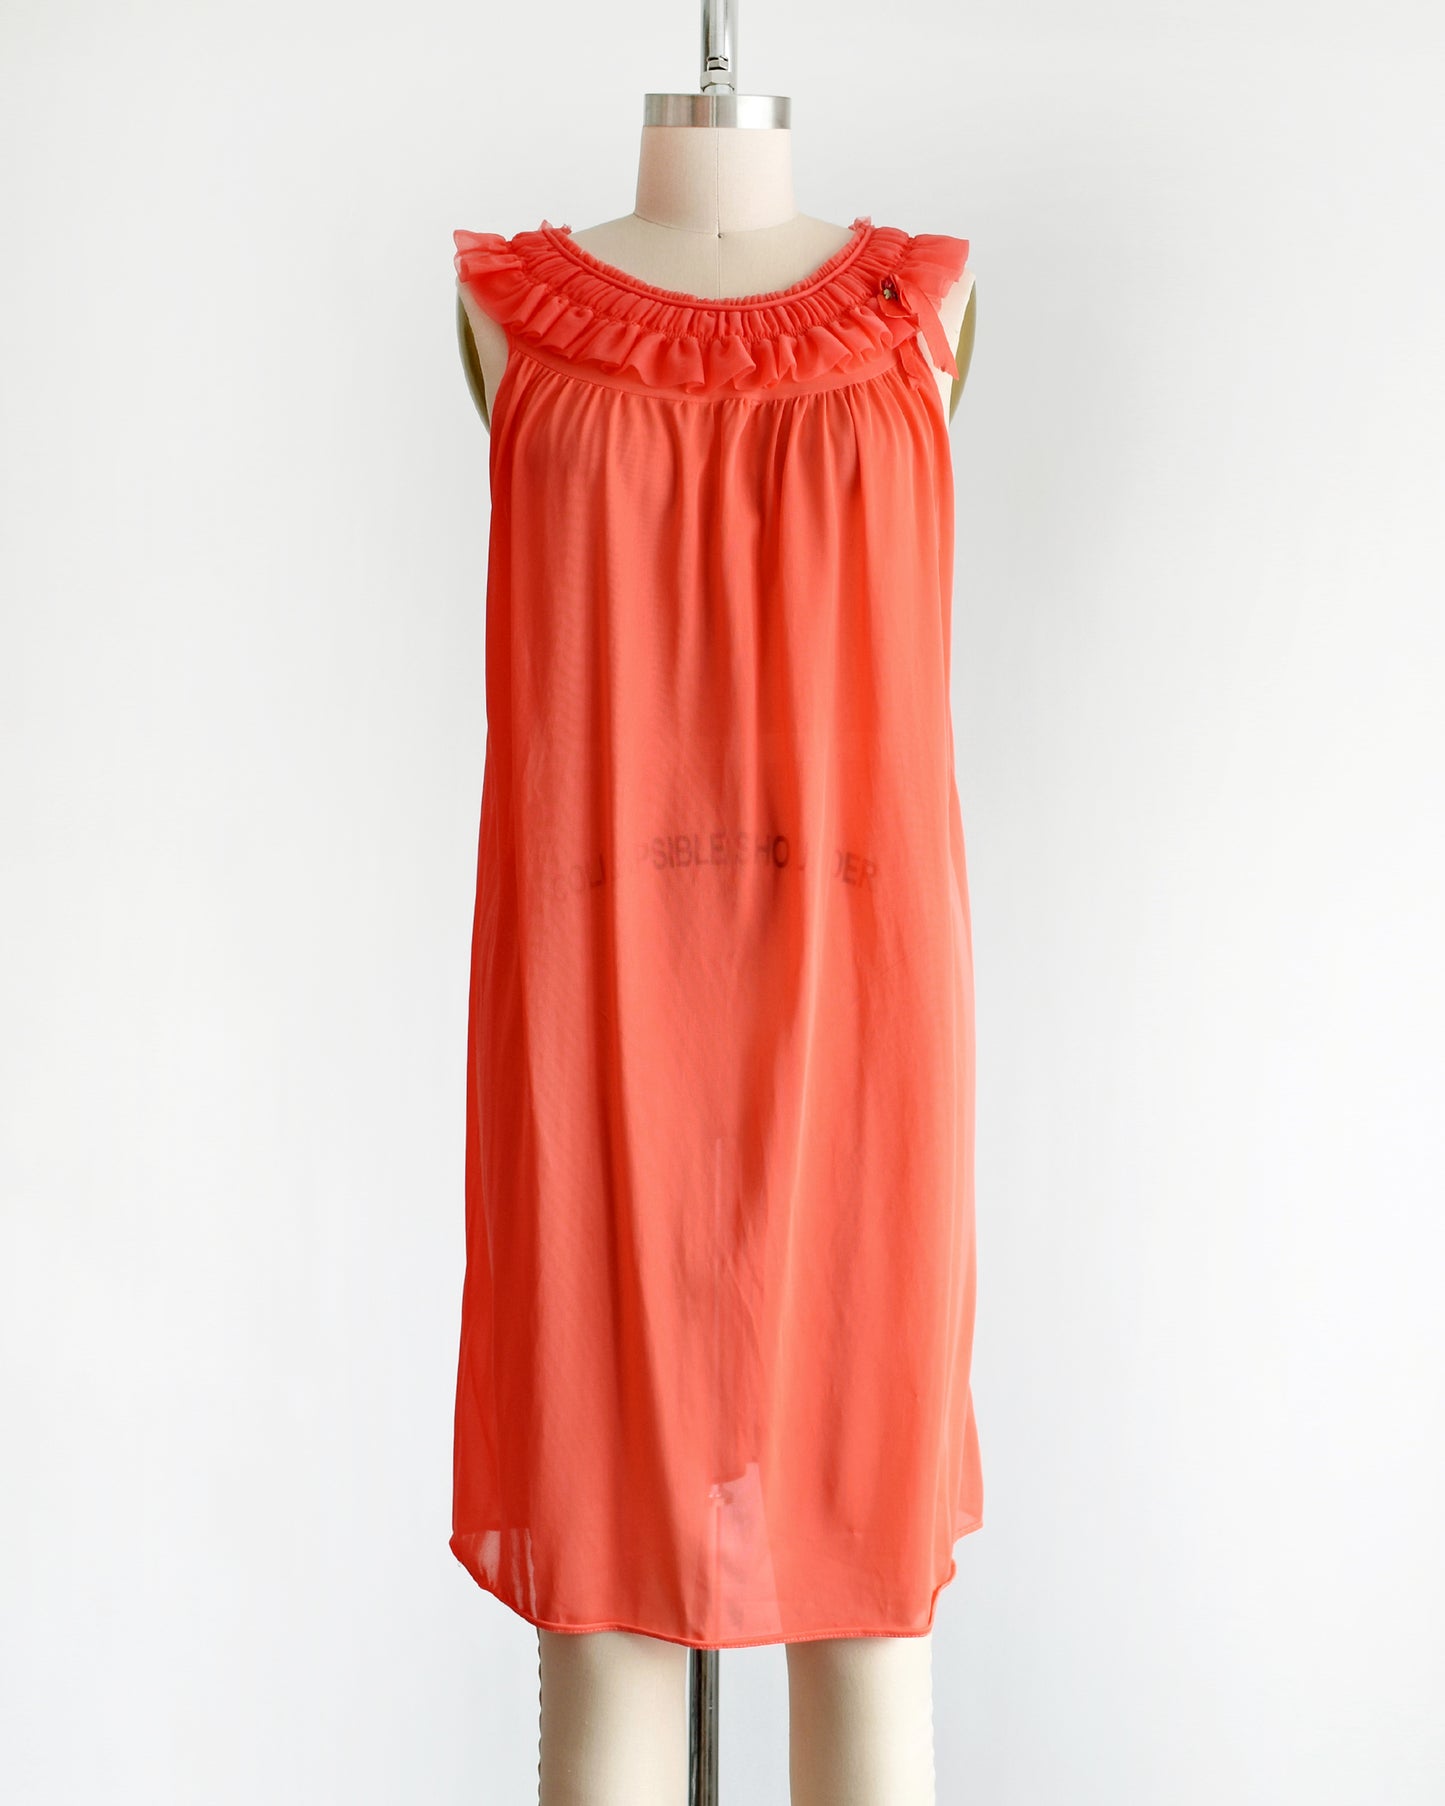 a vintage 1960s/1970s hot coral ruffle nightie that has a ruffled neckline